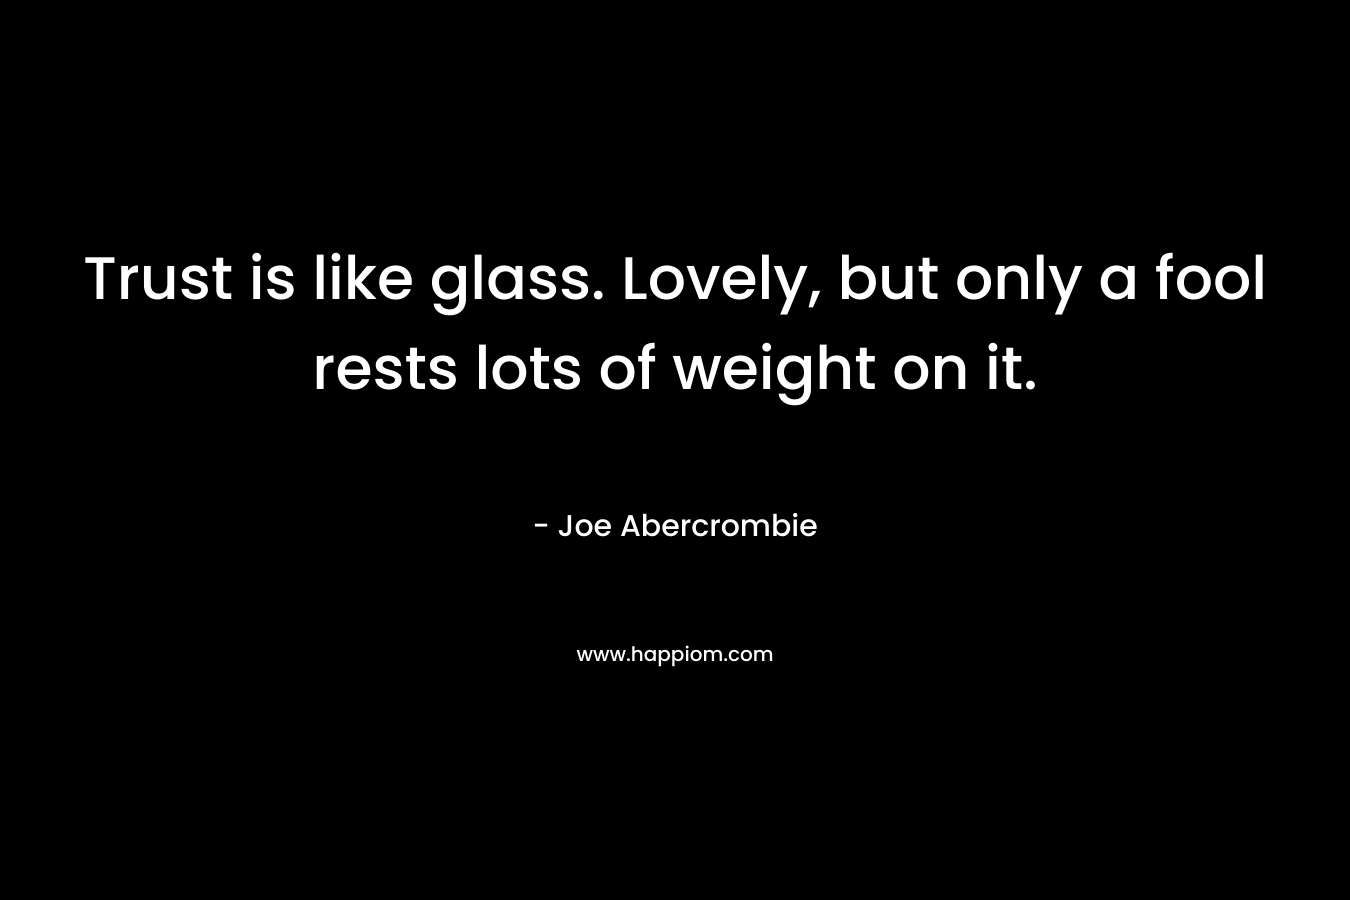 Trust is like glass. Lovely, but only a fool rests lots of weight on it.